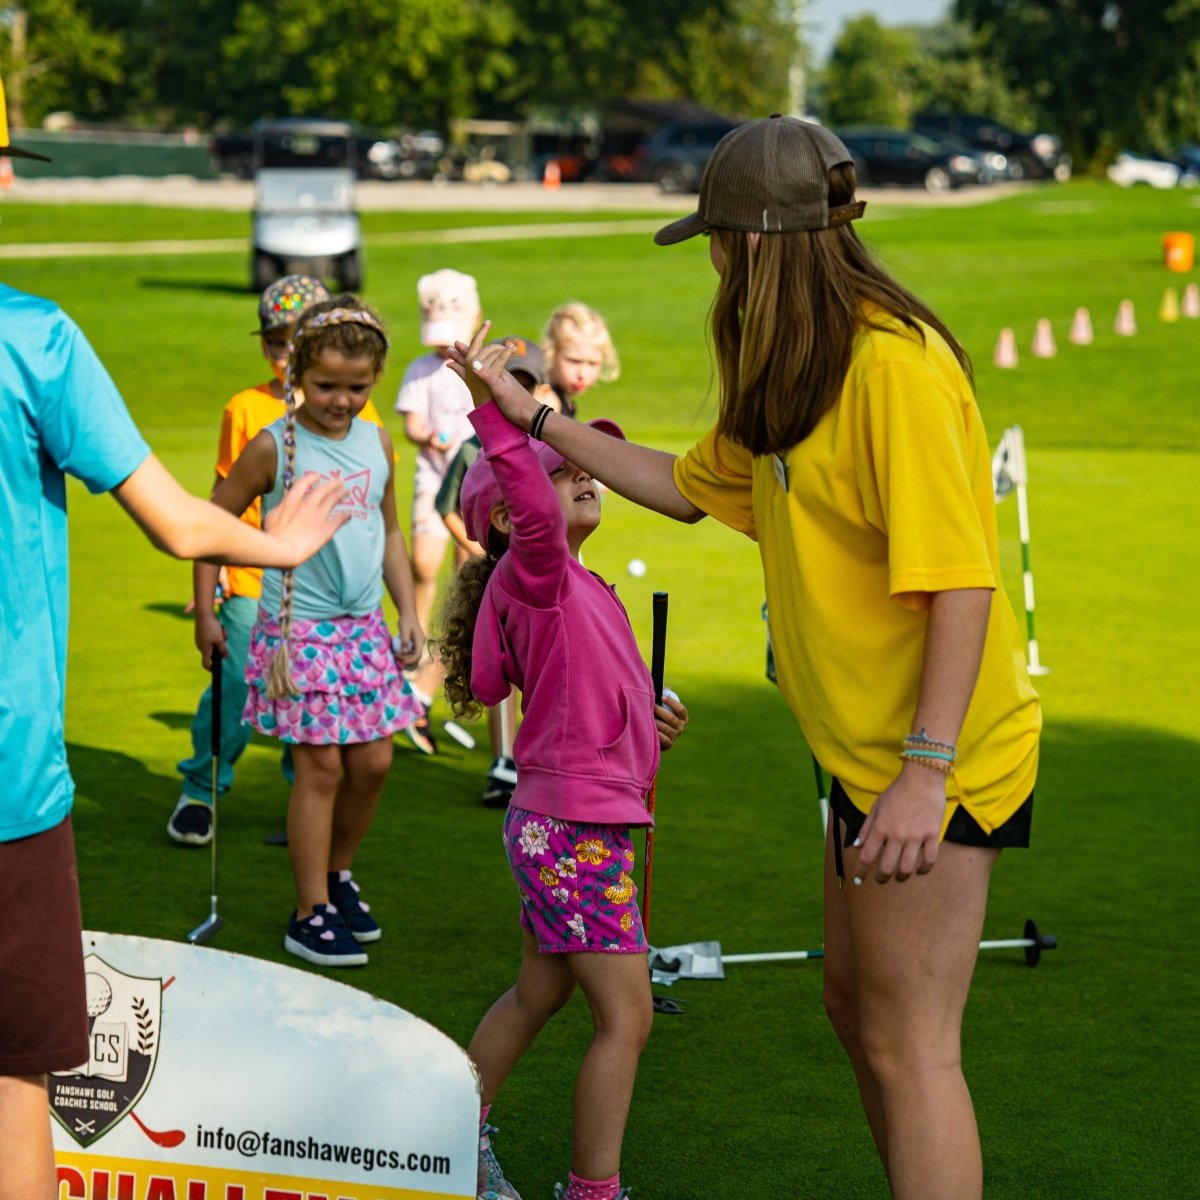 Golf summer camp for kids in London, Ontario